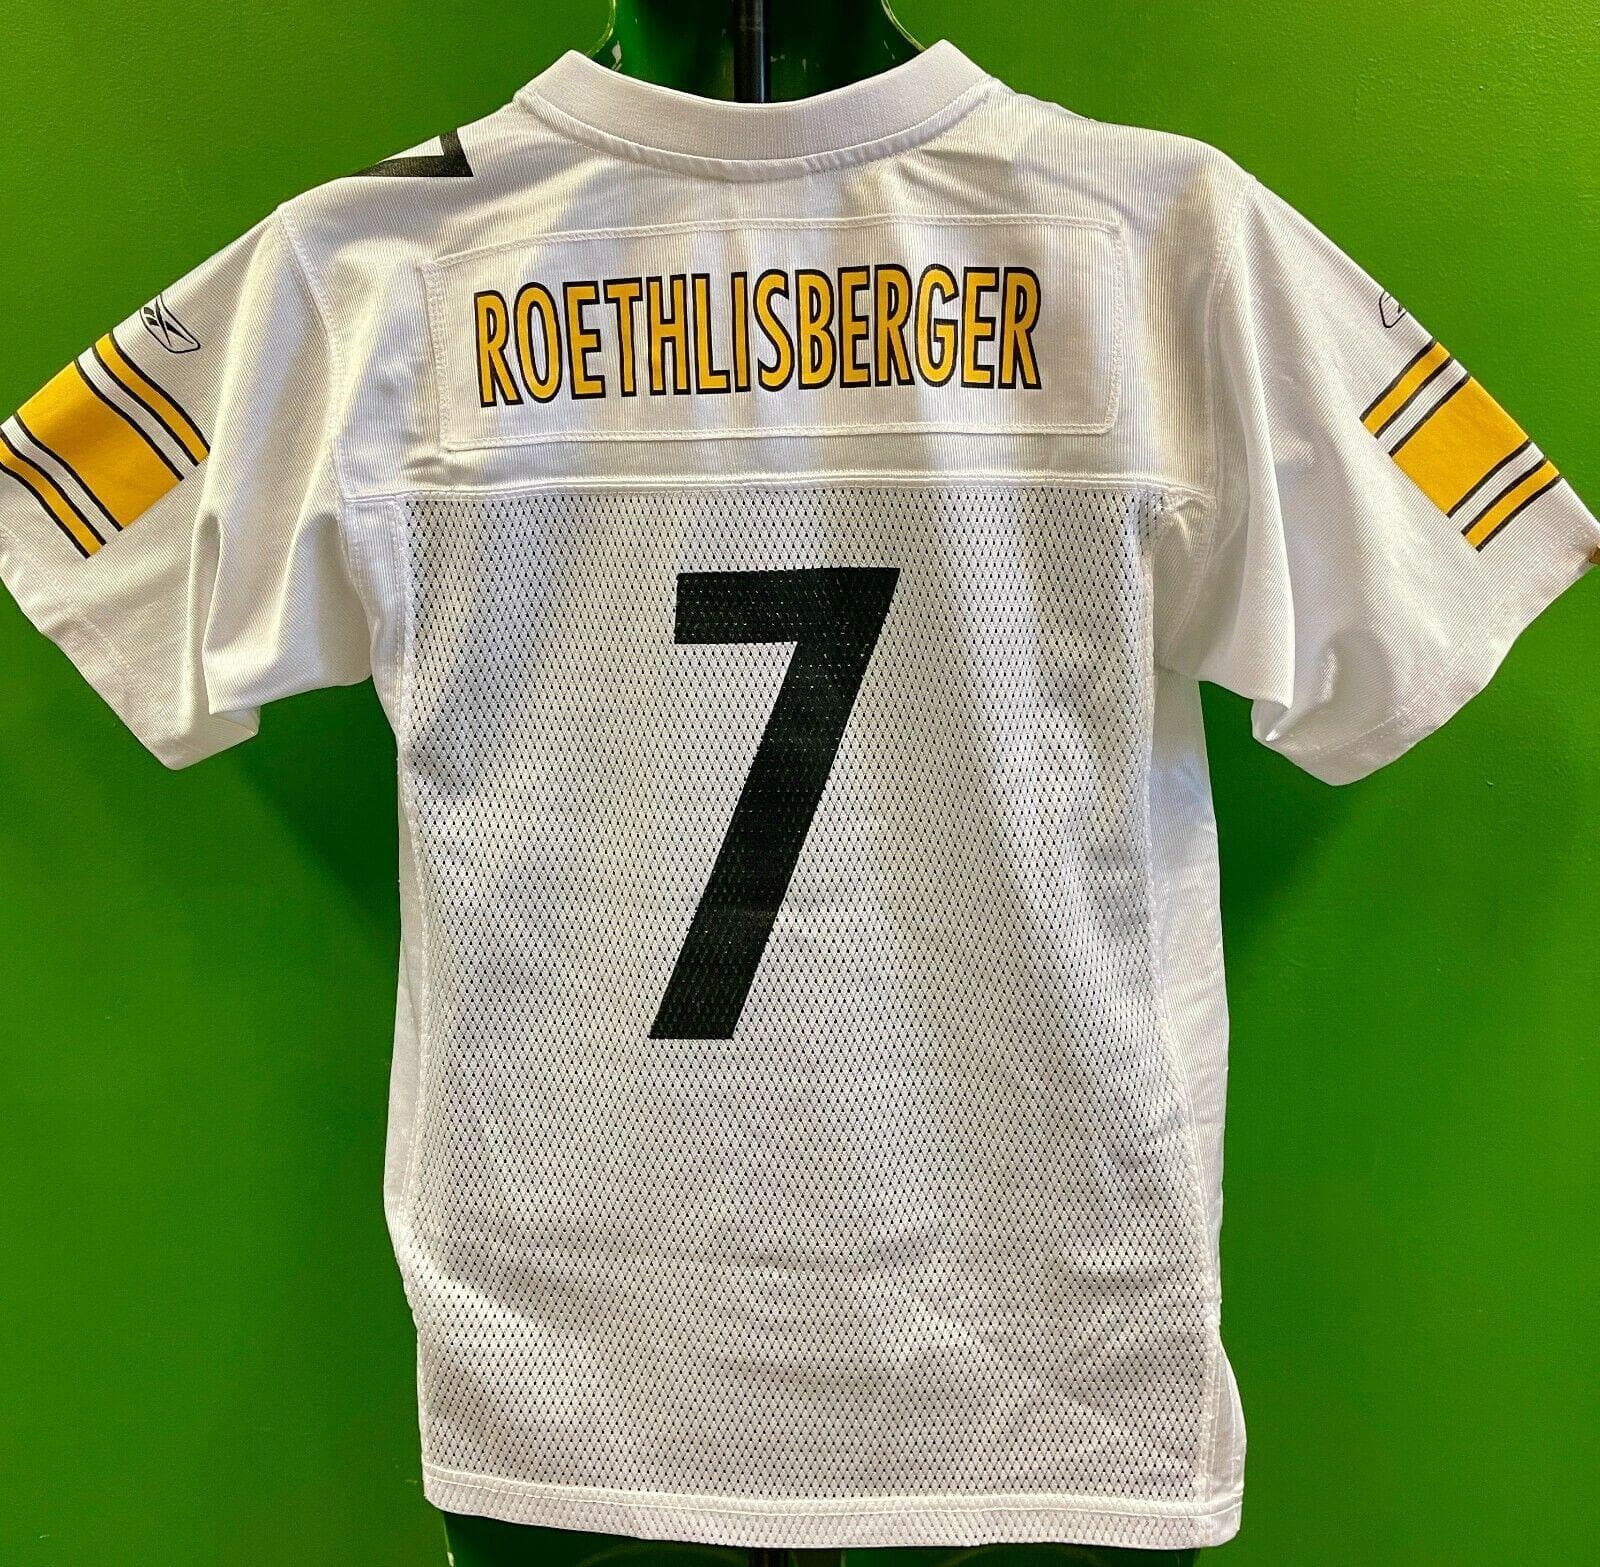 NFL Pittsburgh Steelers Ben Roethisberger Jersey Youth Large 14-16